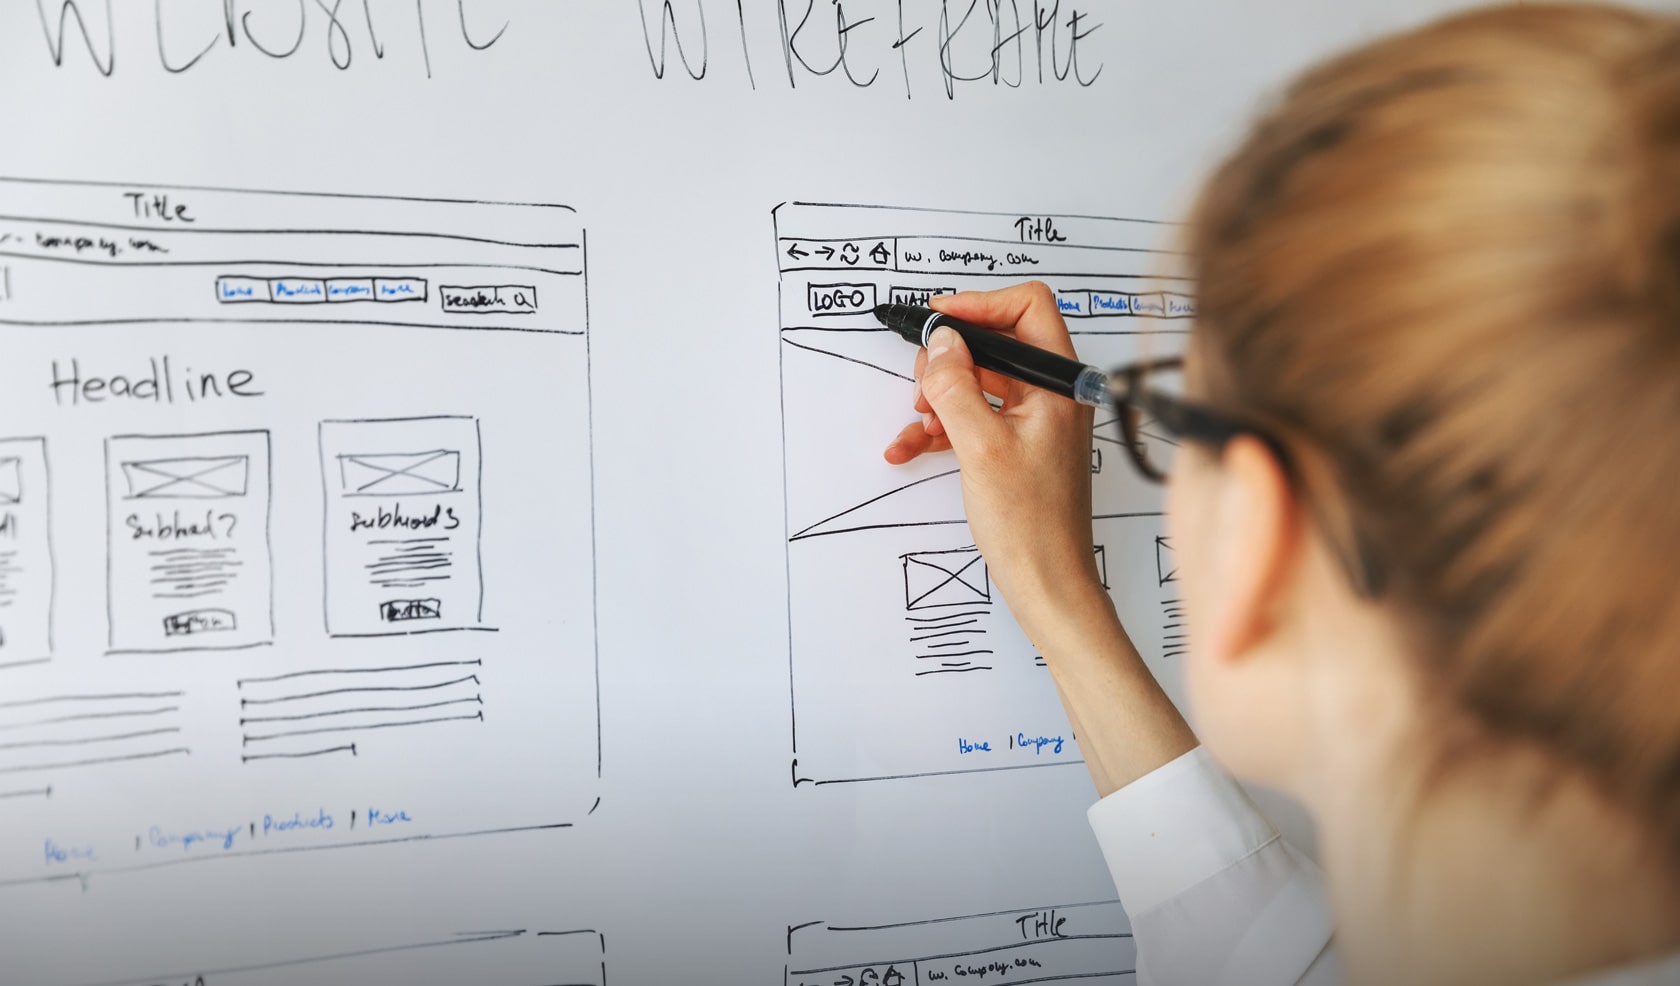  Creating a delightful design begins with a well-crafted wireframe.